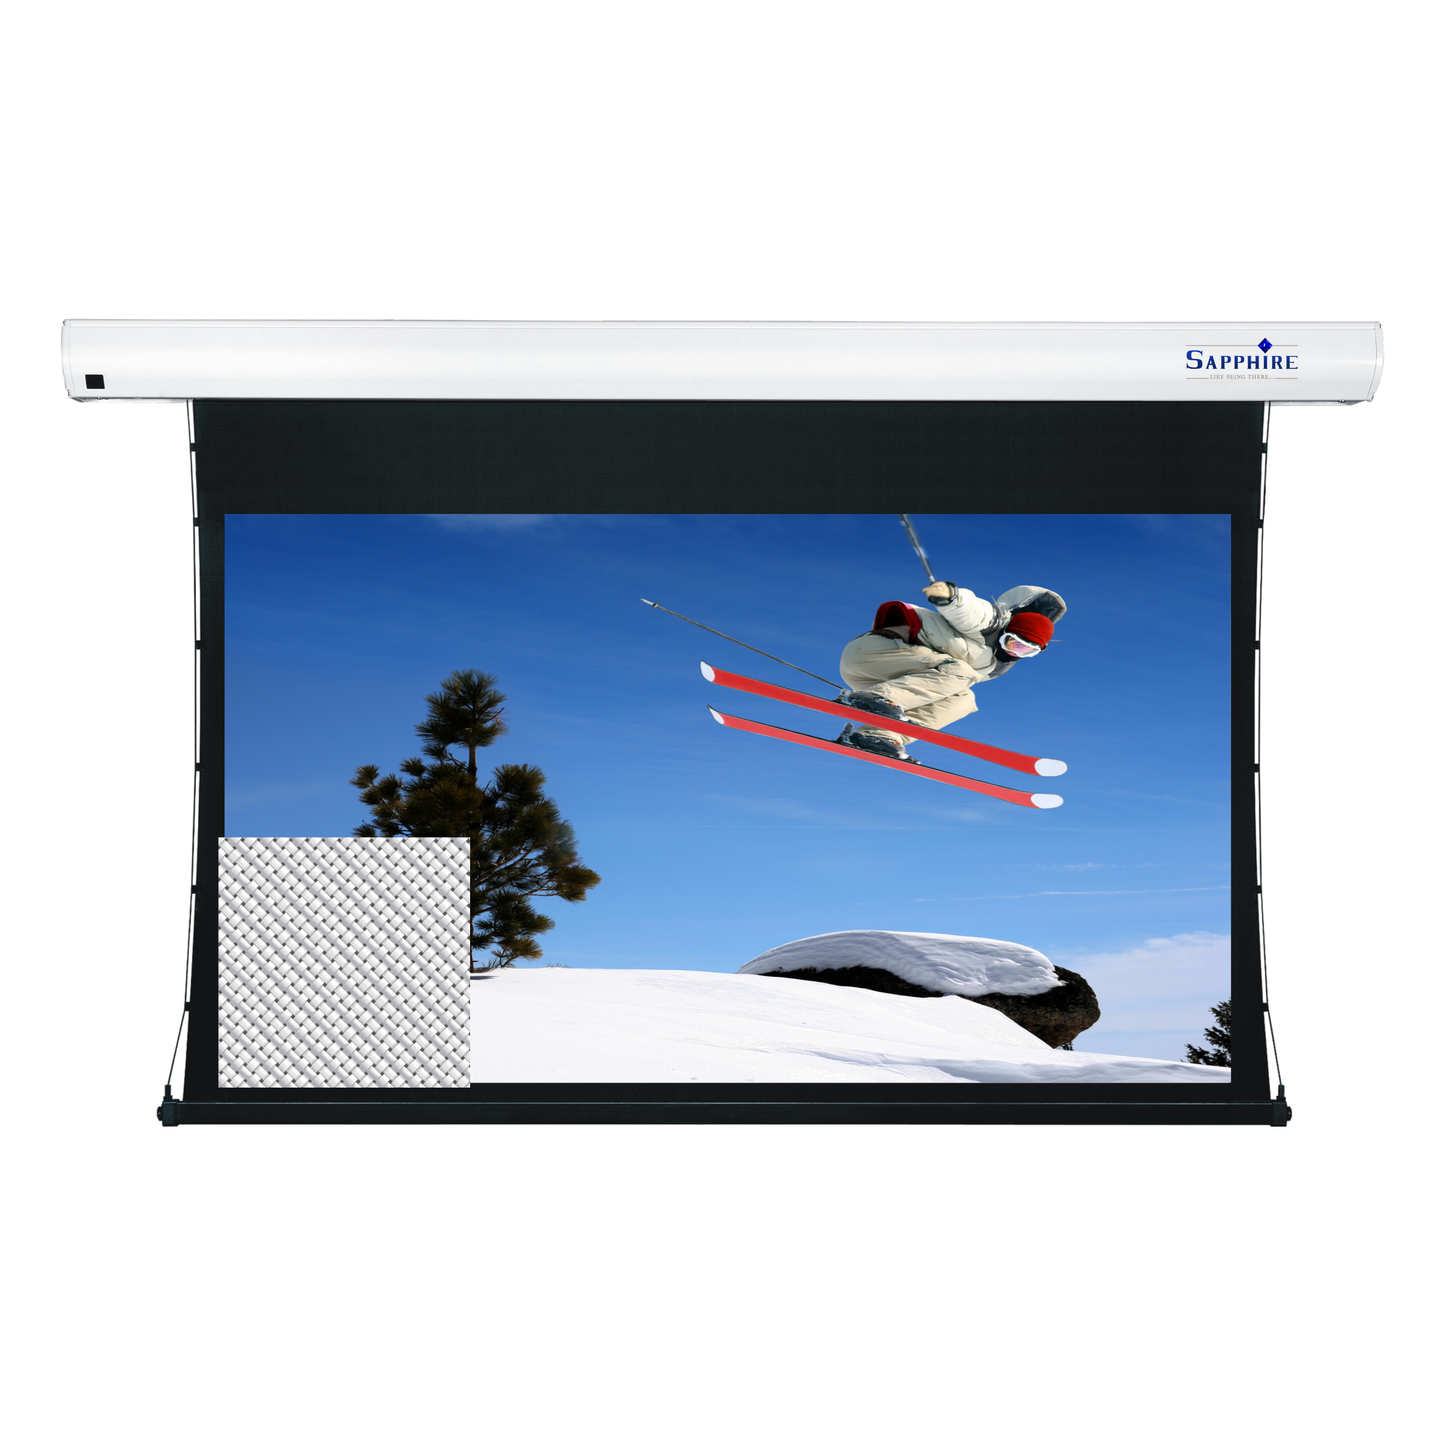 Sapphire Teb Tension Electric Infra Red 16:9 Format Screen Viewing Area 3010mm x 1693mm Woven Approx Case Dimensions L 3538mm x H 143mm x D 135mm